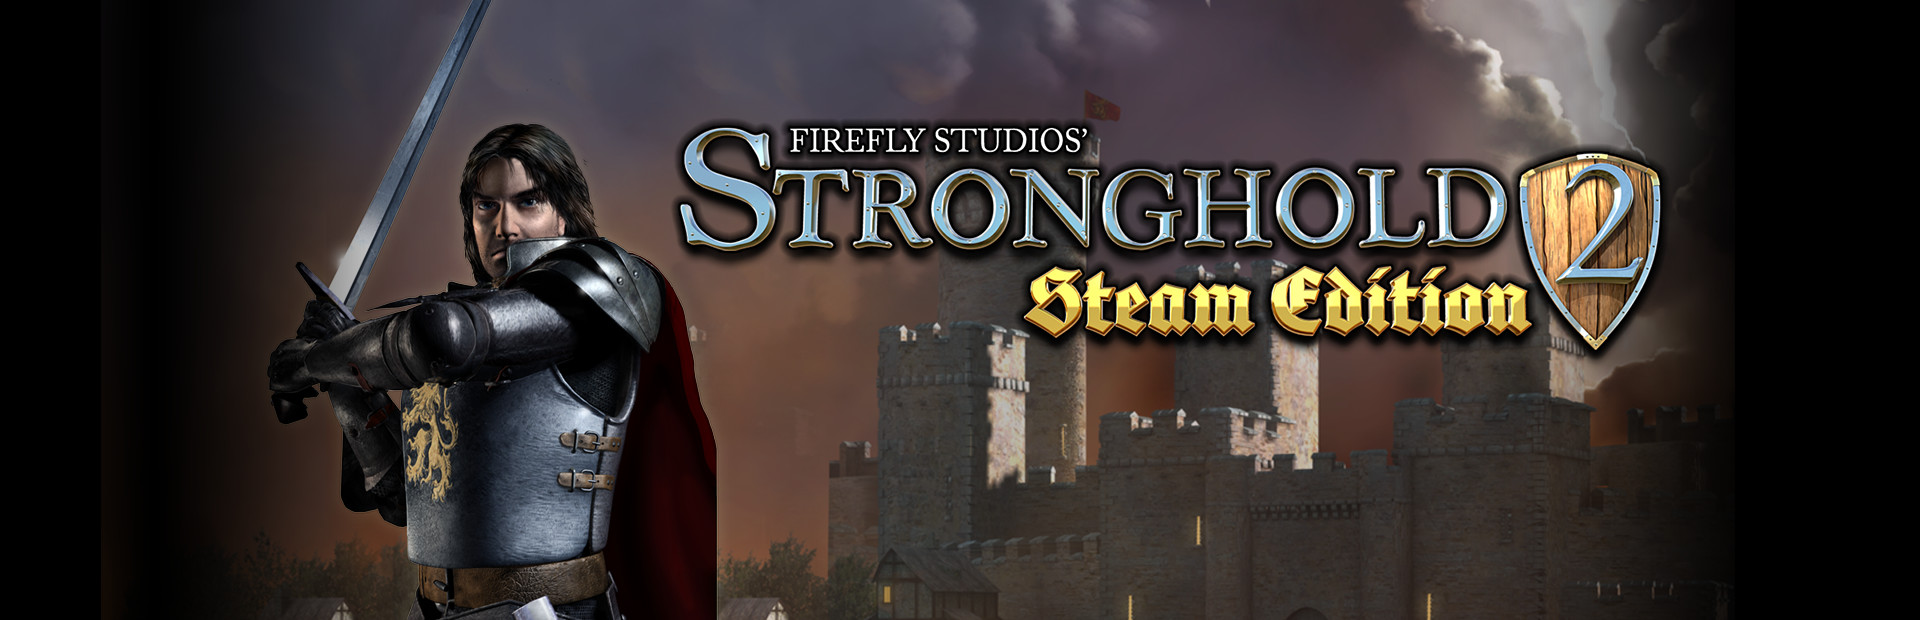 Stronghold 2: Steam Edition cover image